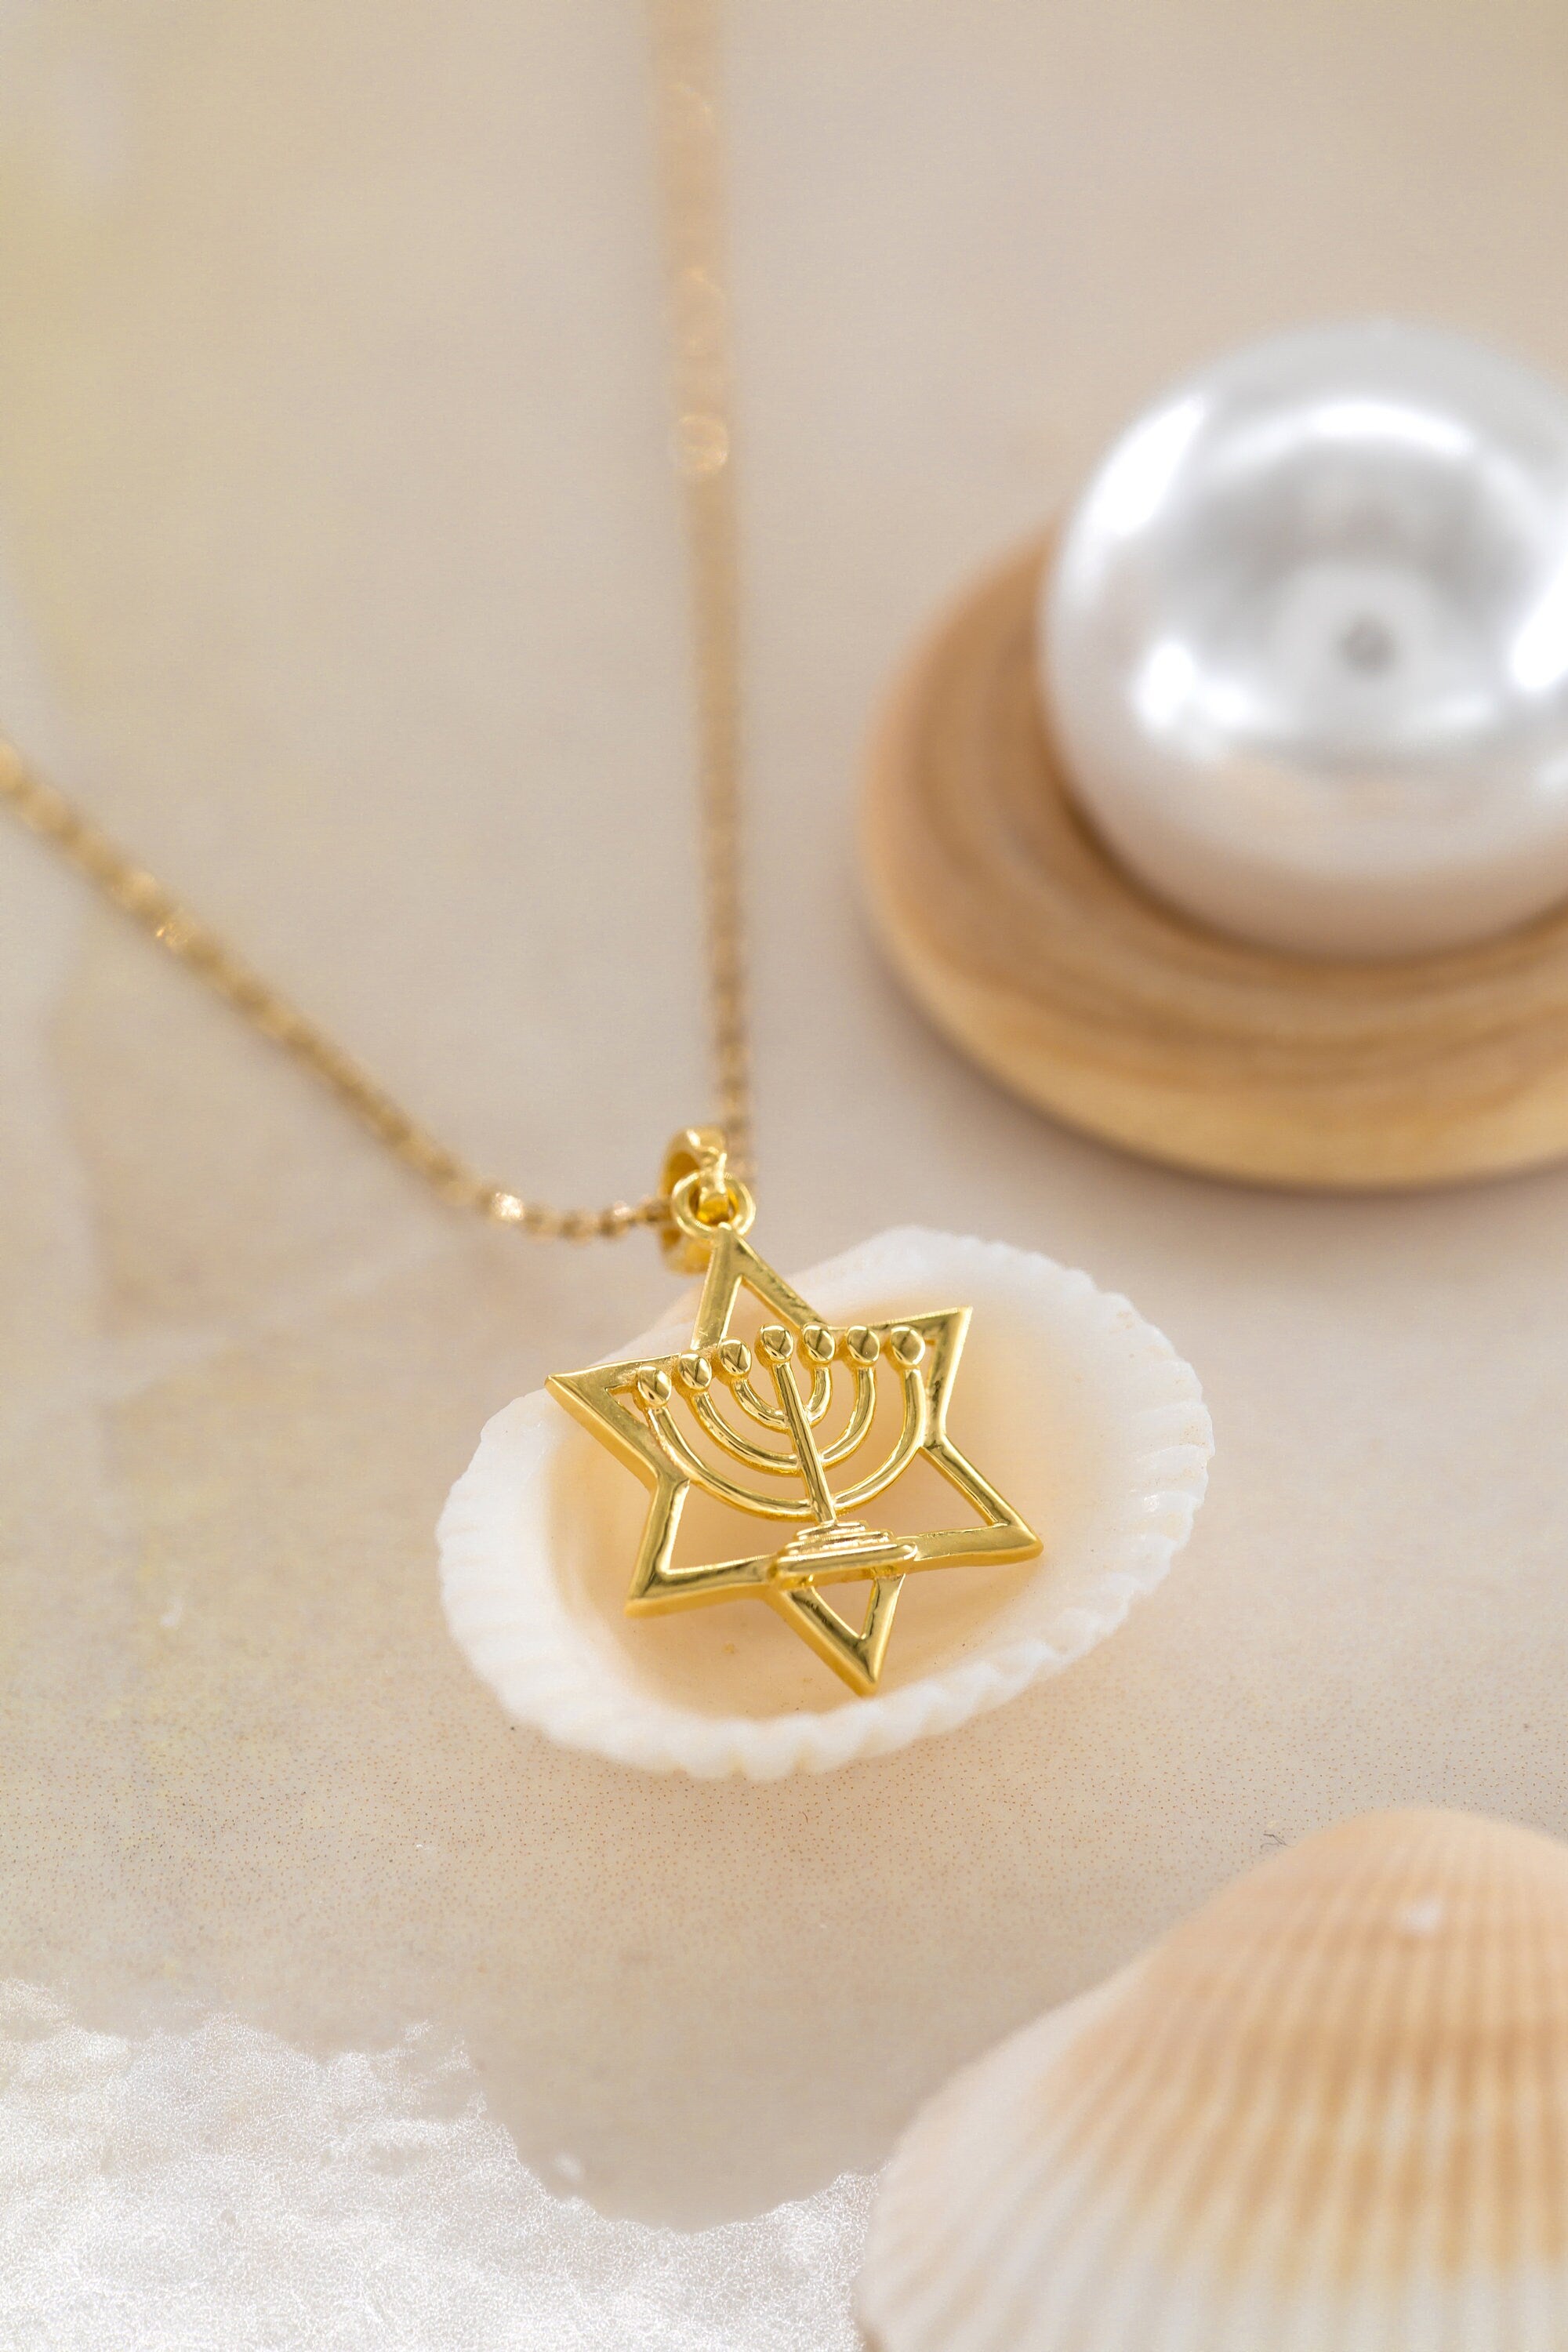 14K Gold Meaningful David Pendant - Symbolic Necklace, Judaica Jewelry, Sterling Silver Star of David, Religious Gift, Unisex Necklace